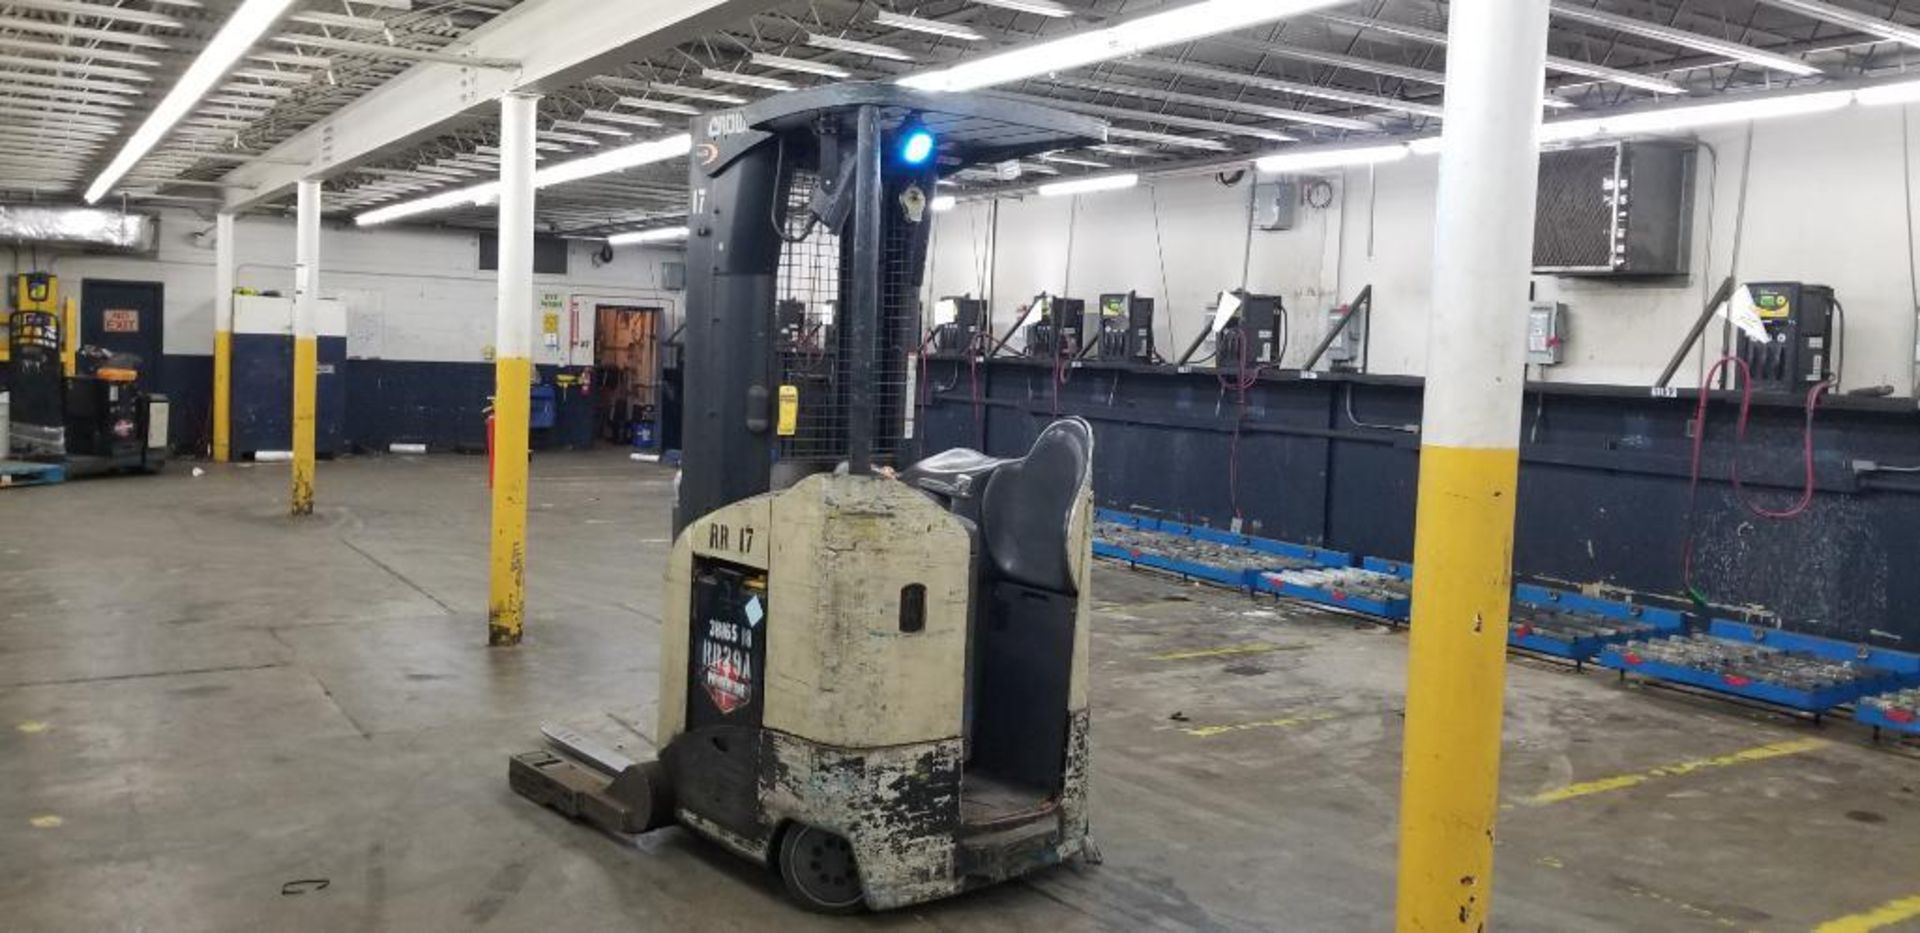 Crown RR 5200 Series Electric Reach Truck, Model RR5220-45, S/N 1A274886, 4,500 LB. Lift Capacity, 2 - Image 3 of 8